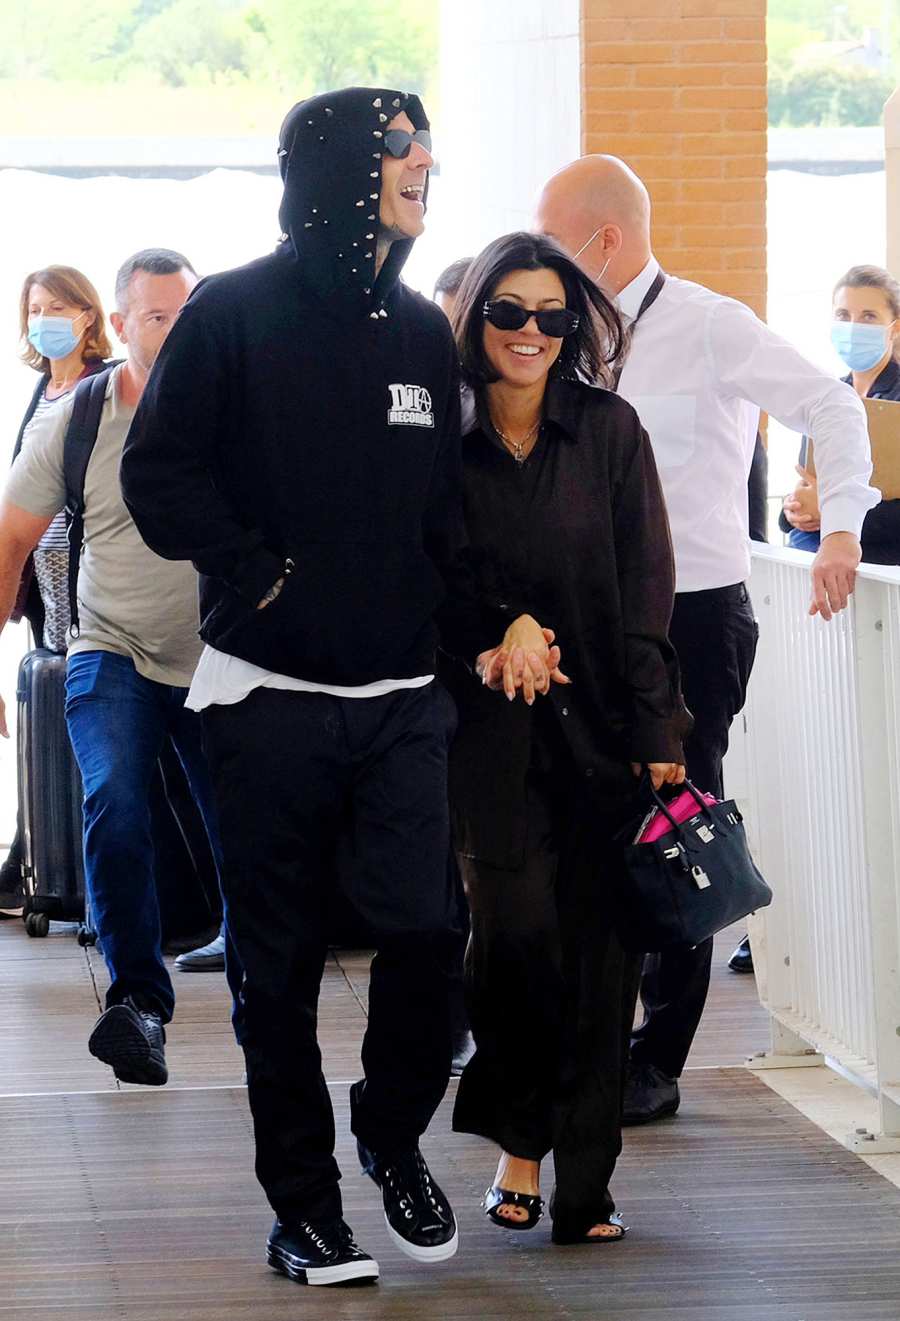 Kourtney Kardashian Travis Barker Italy Style Is All About Color Coordination